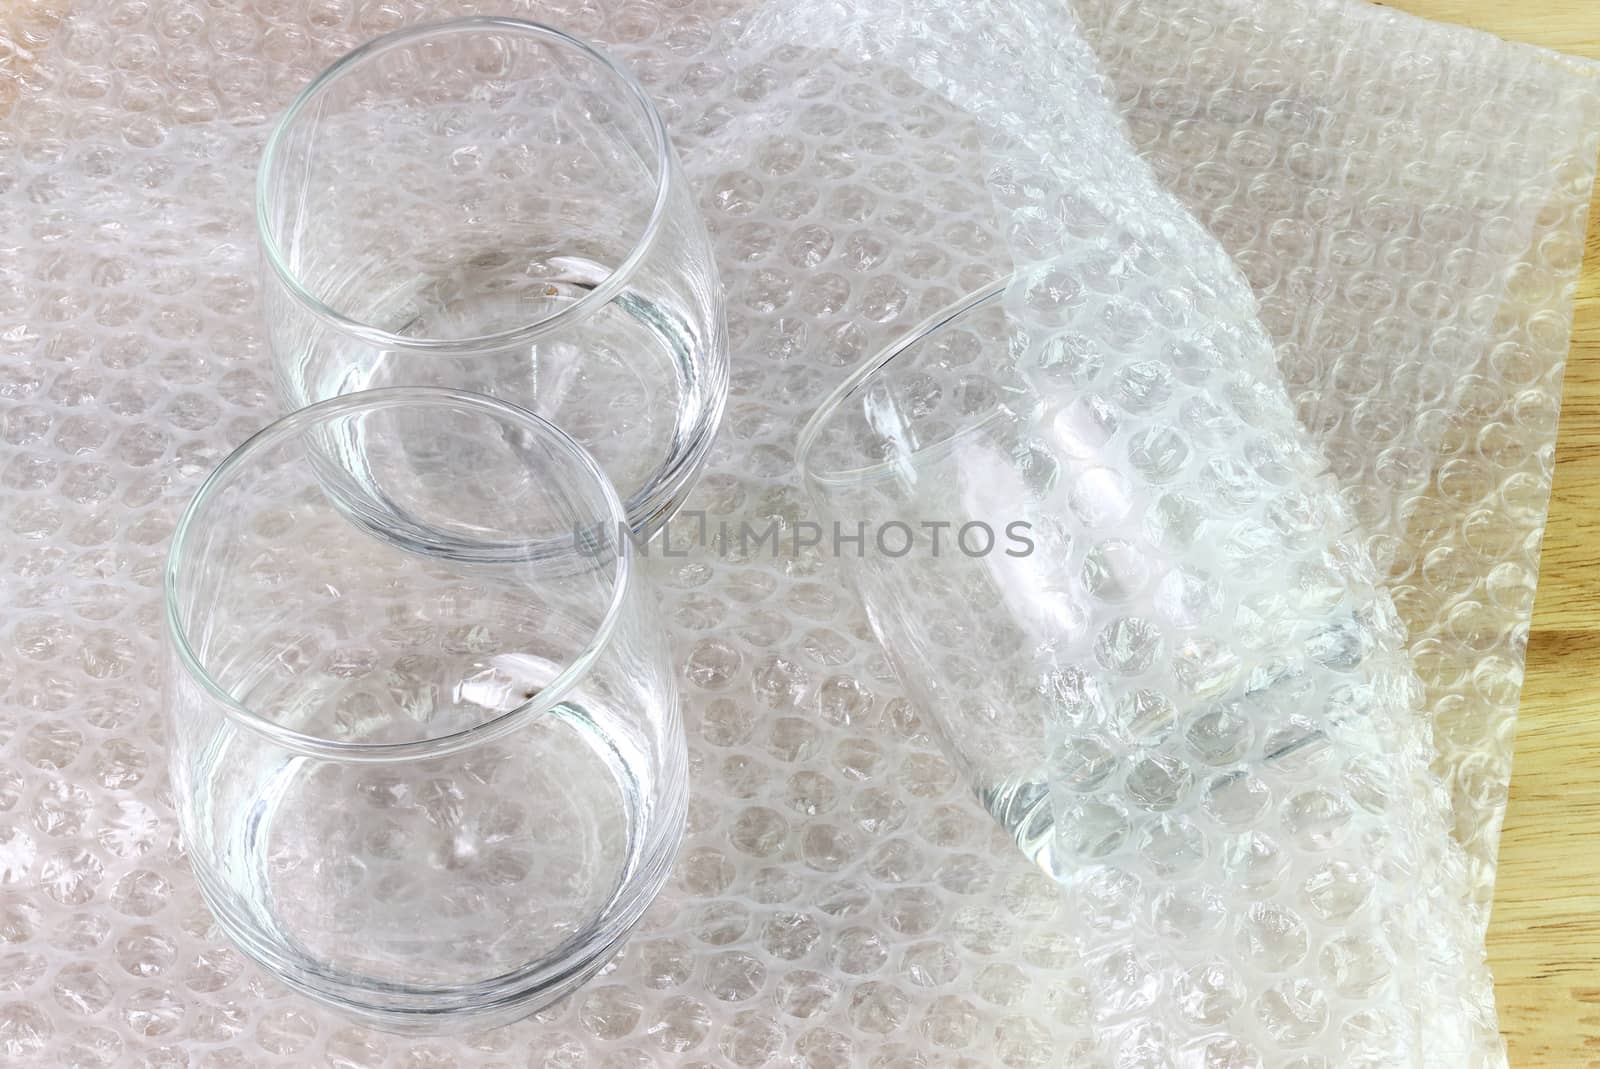 the bubble wrap cover water glass in box for protection product cracked or insurance During transit  

